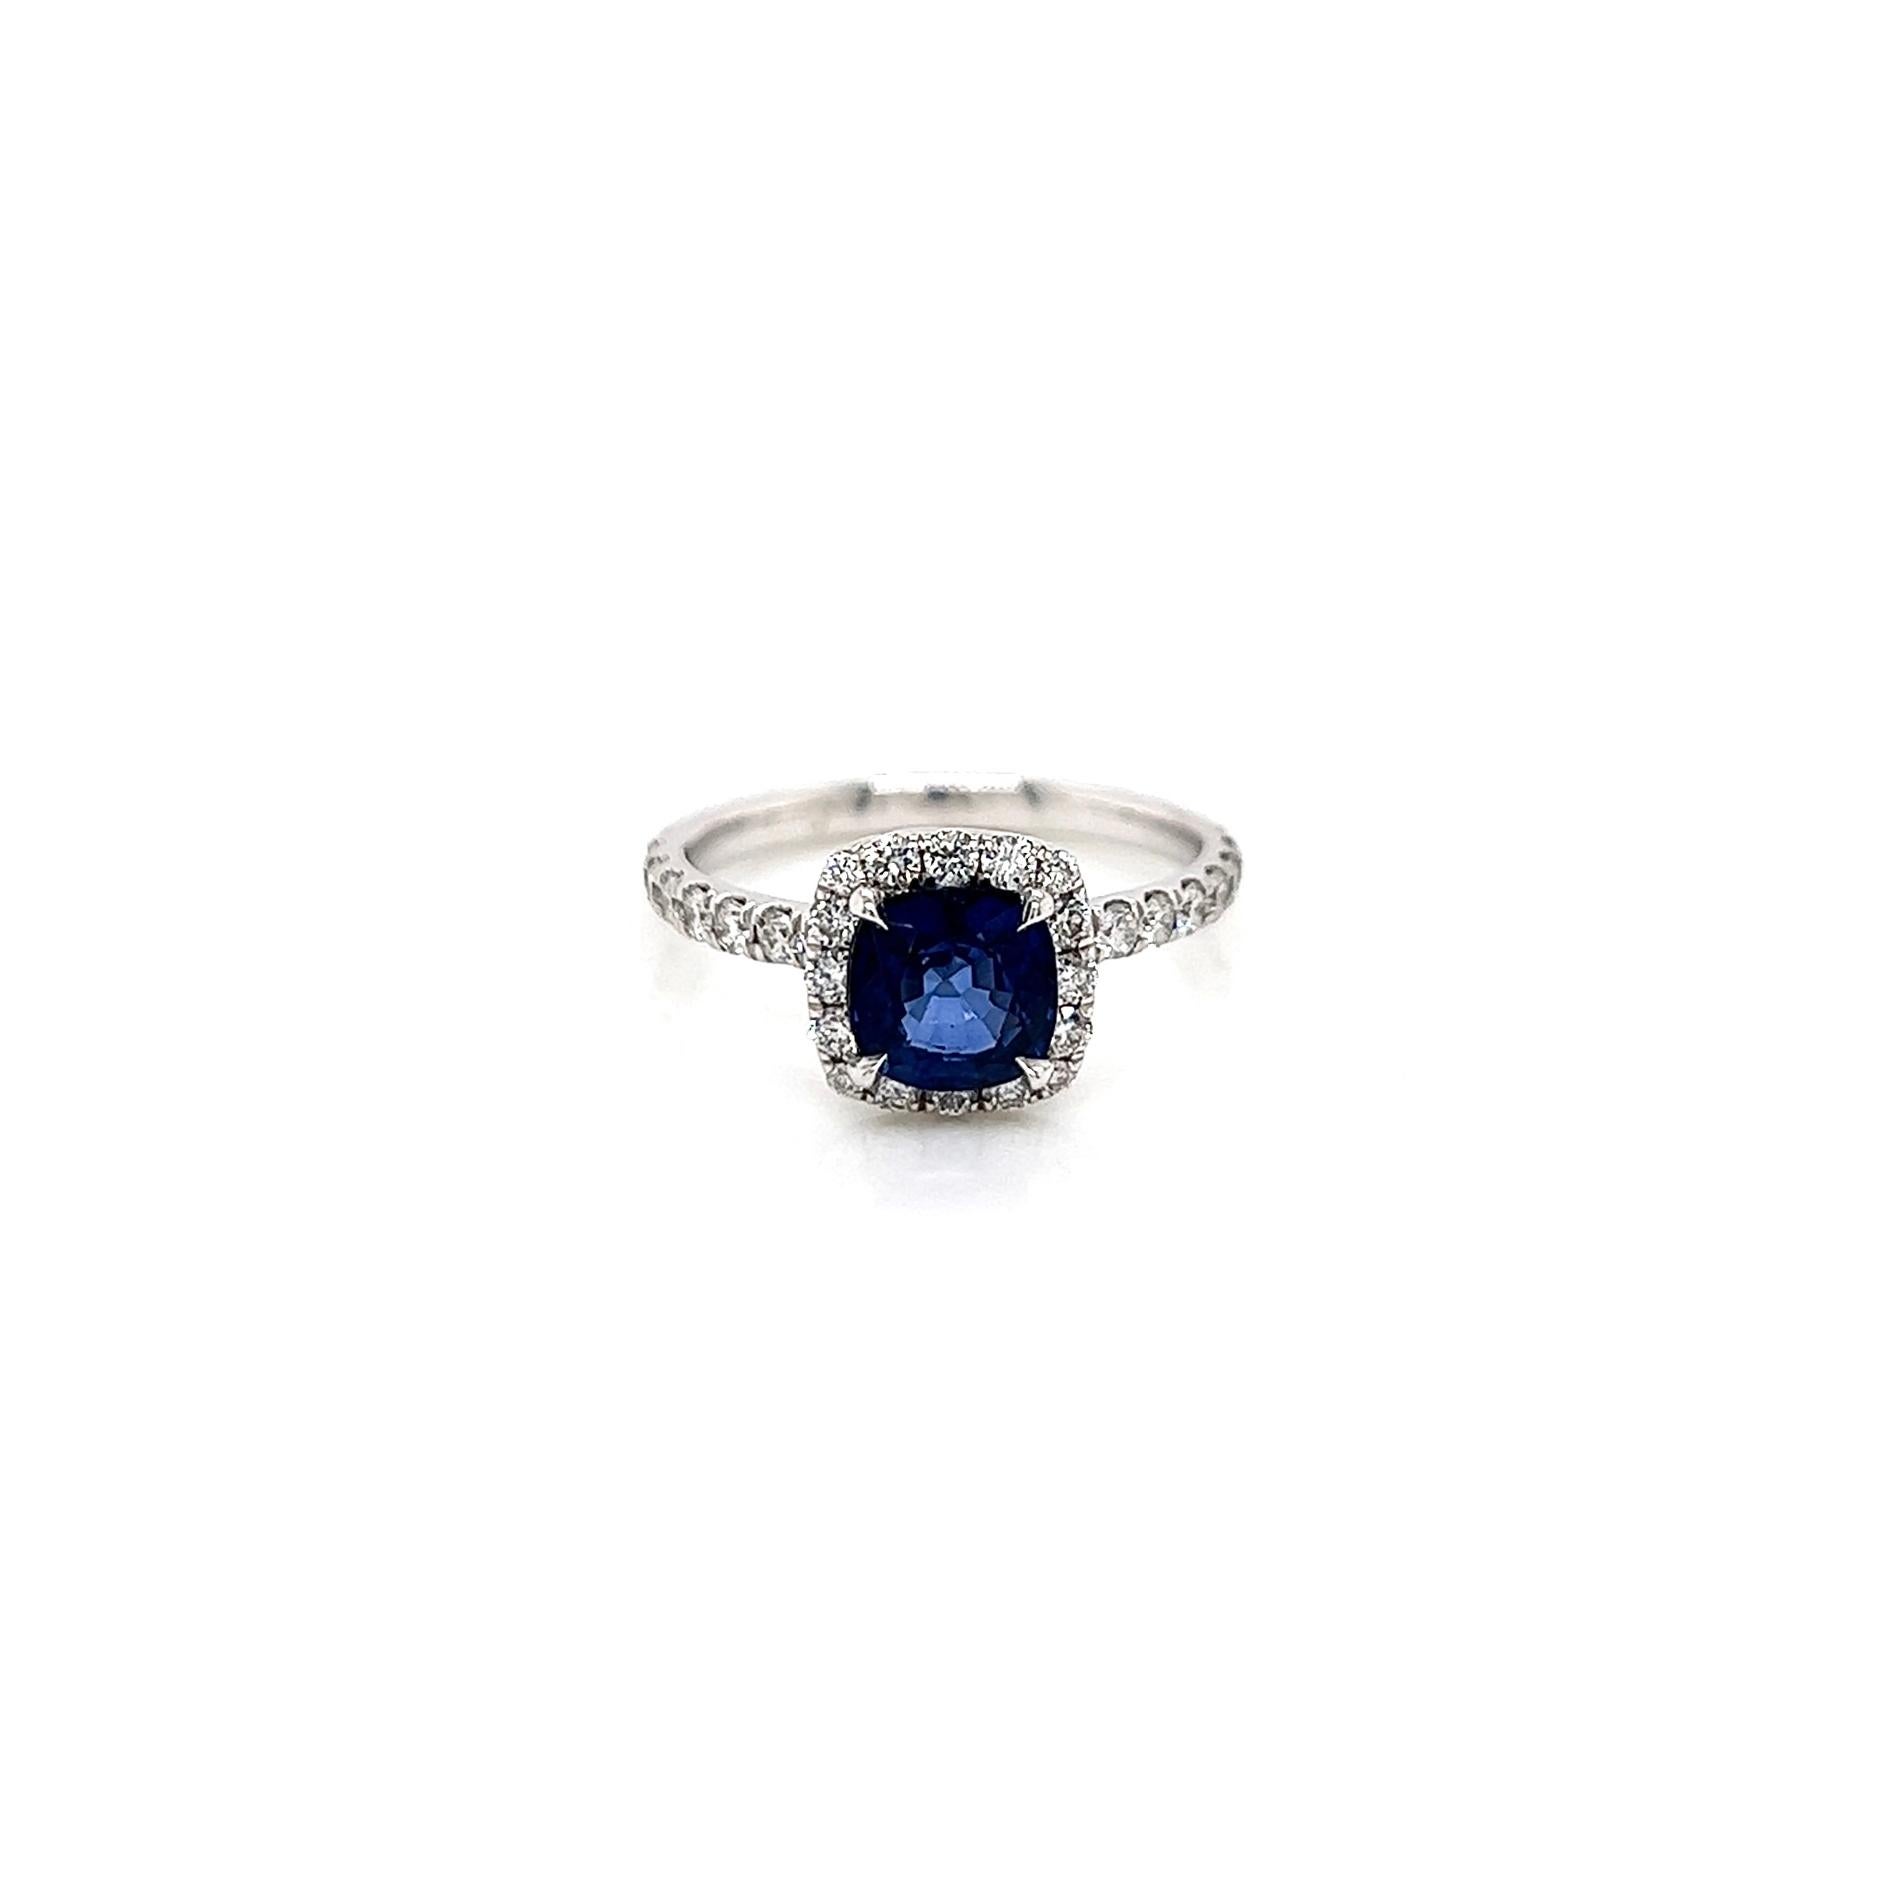 1.96 Total Carat Sapphire Halo Diamond Engagement Ring

Looking for a fabulous sapphire diamond ring? Then you have definitely come to the right place. Sapphire is known for it's symbolic meaning and is a great option for an engagement ring! This